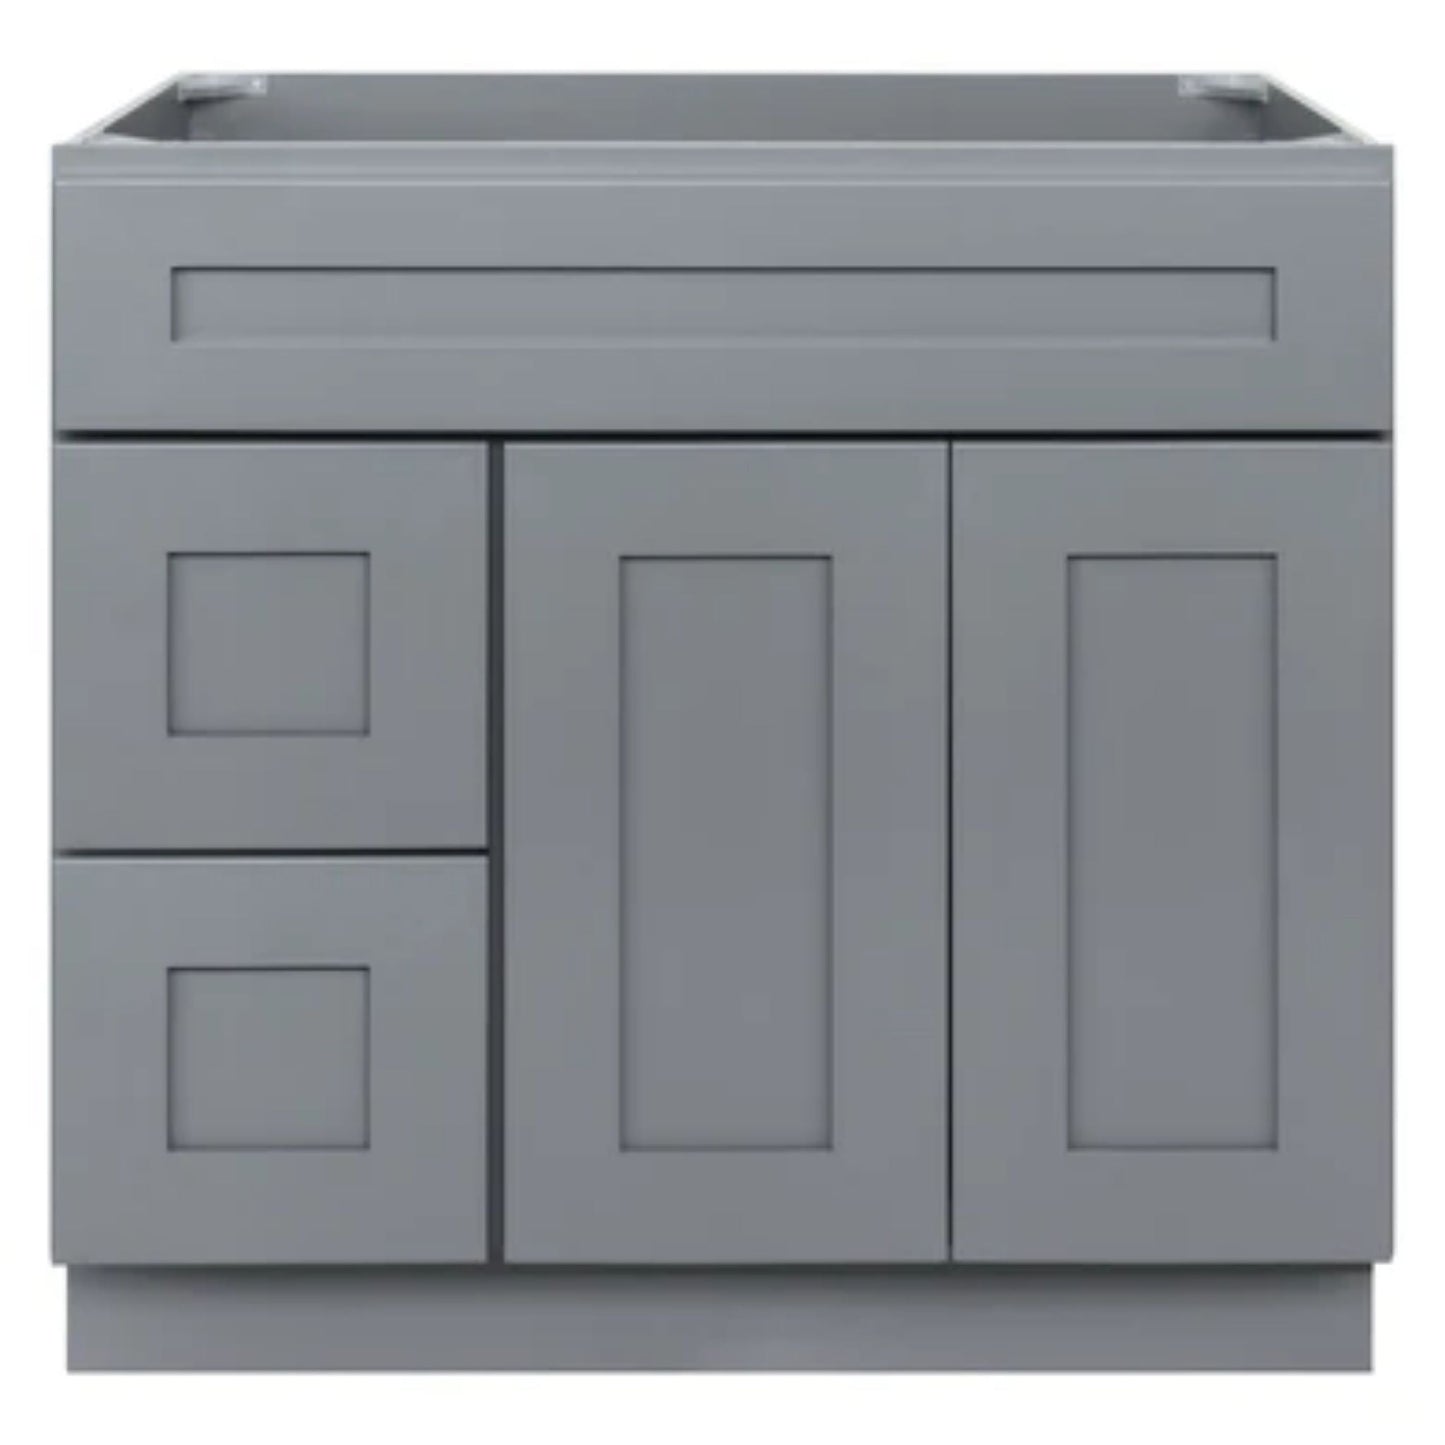 LessCare 30" x 21" x 34 1/2" Colonial Gray Vanity Sink Base Cabinet with Left Drawers